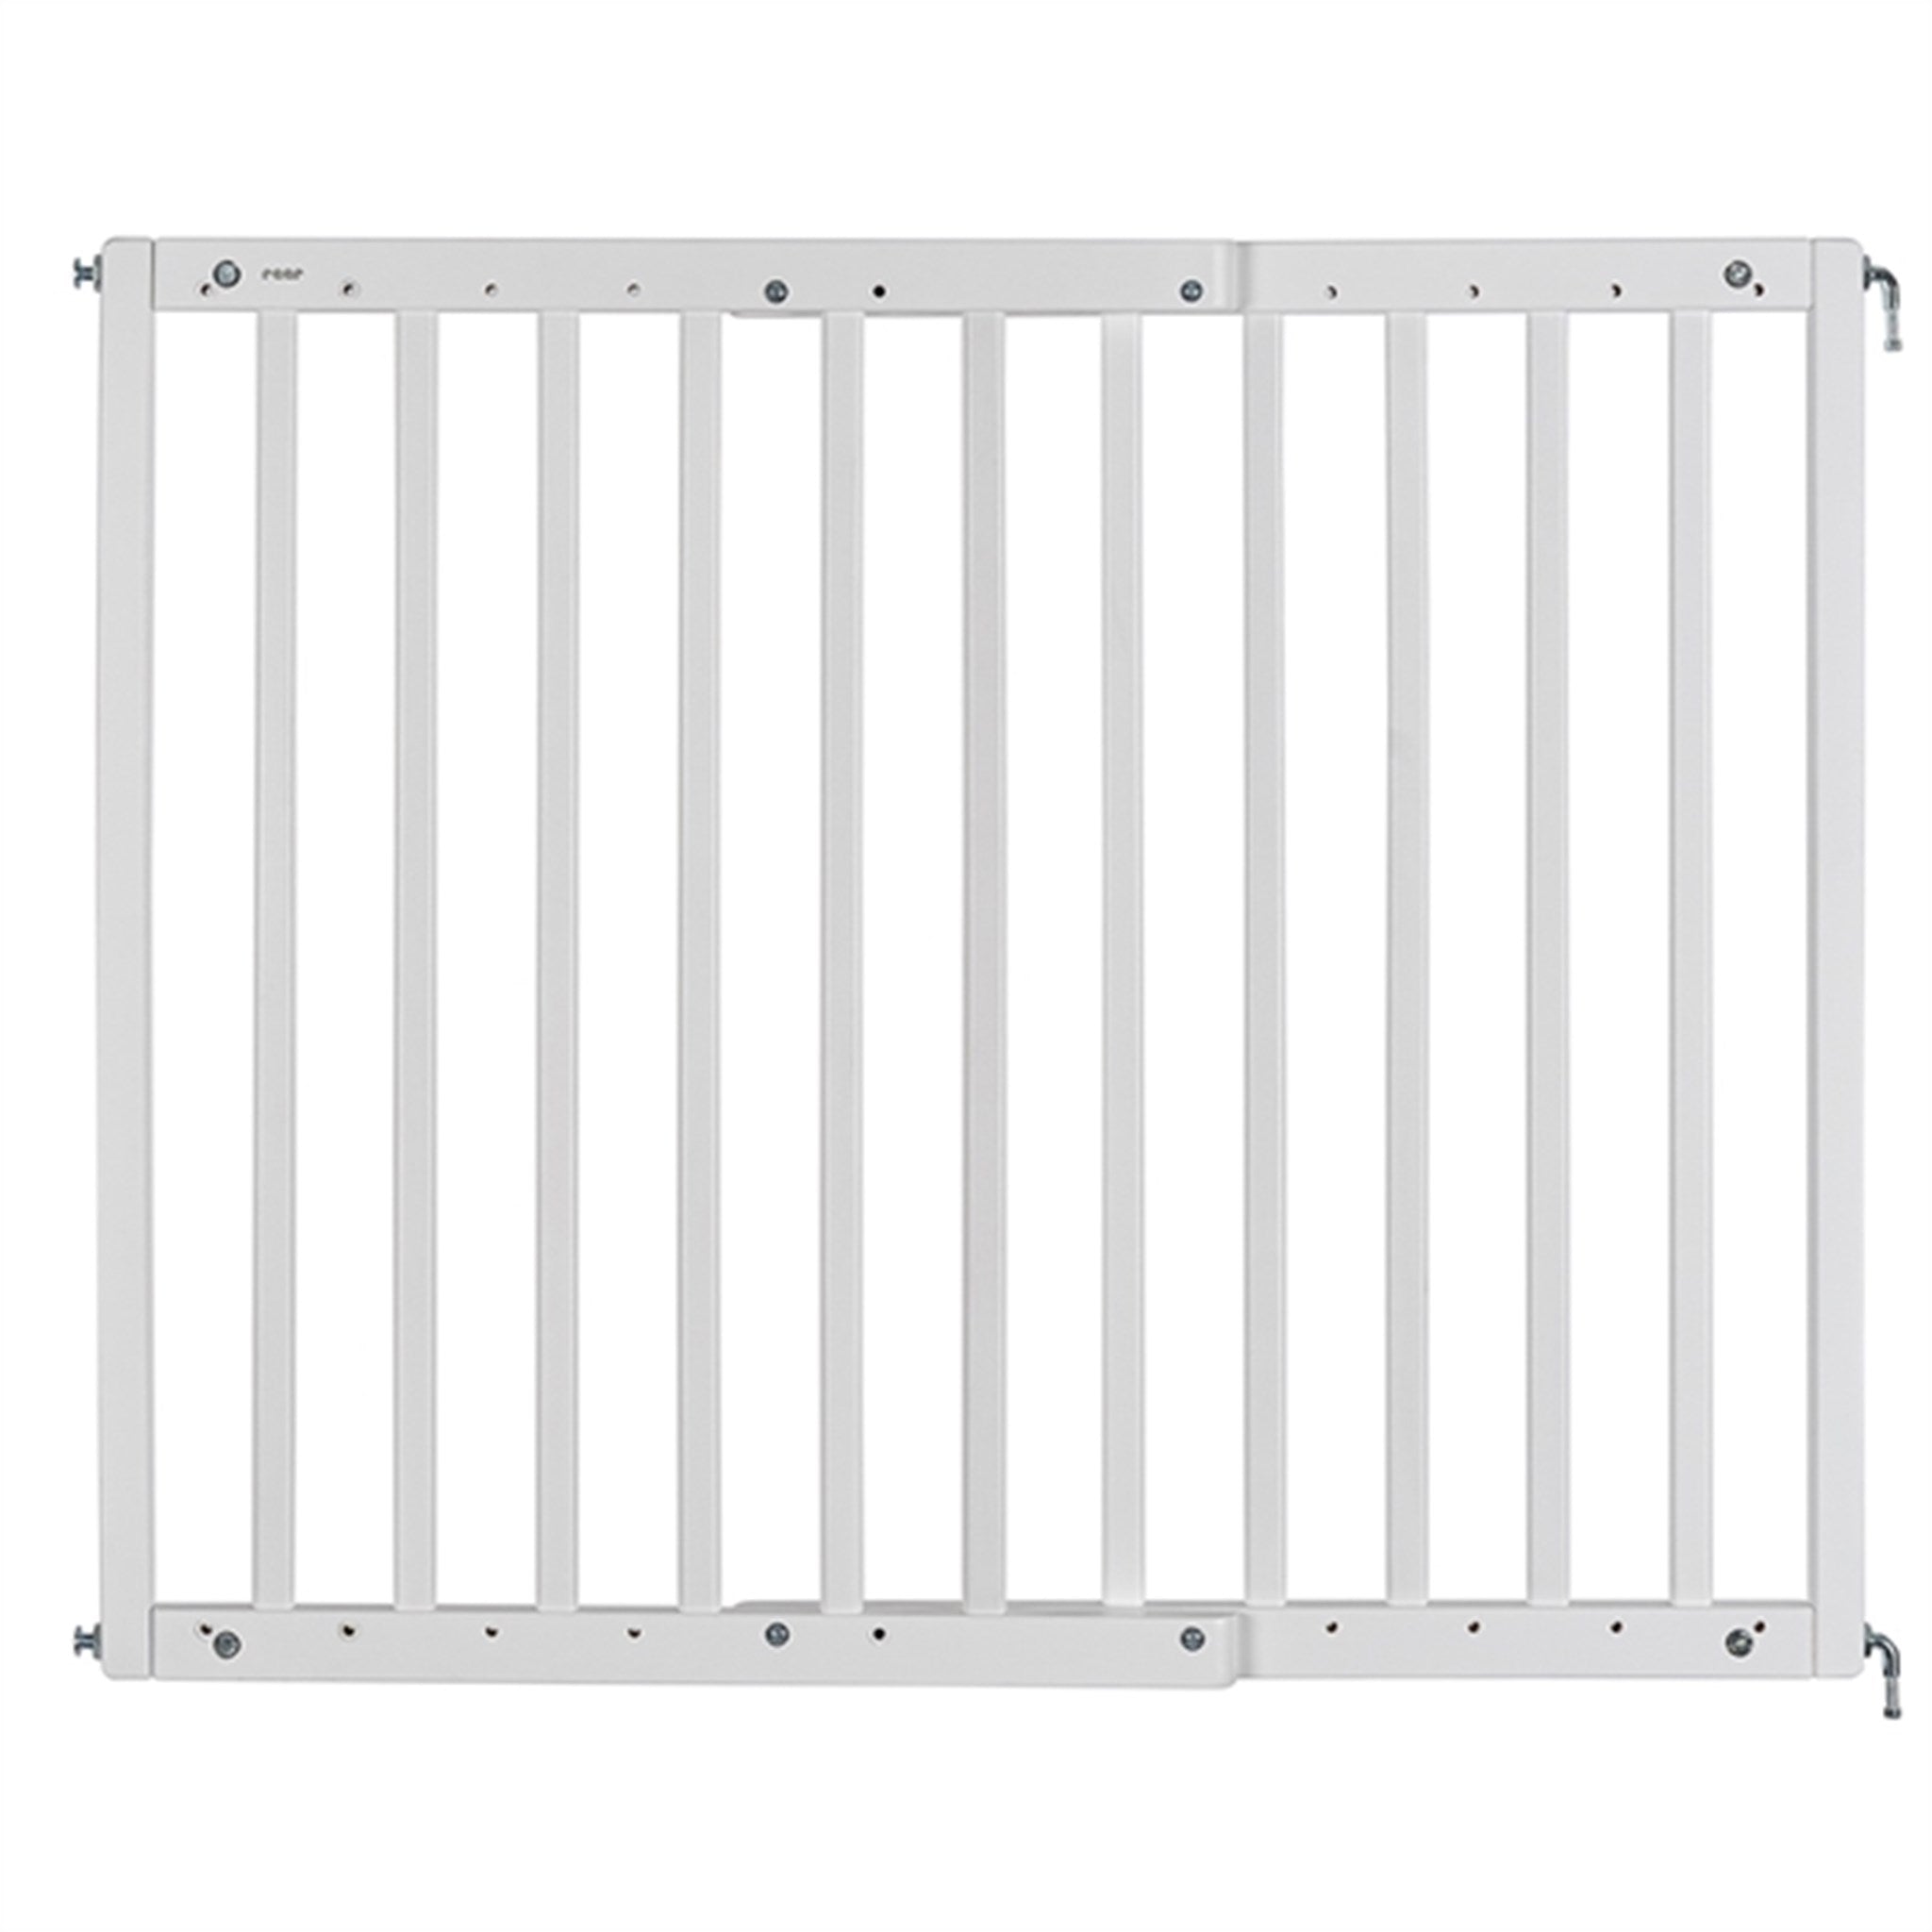 REER Safety Grid Wall-mounted